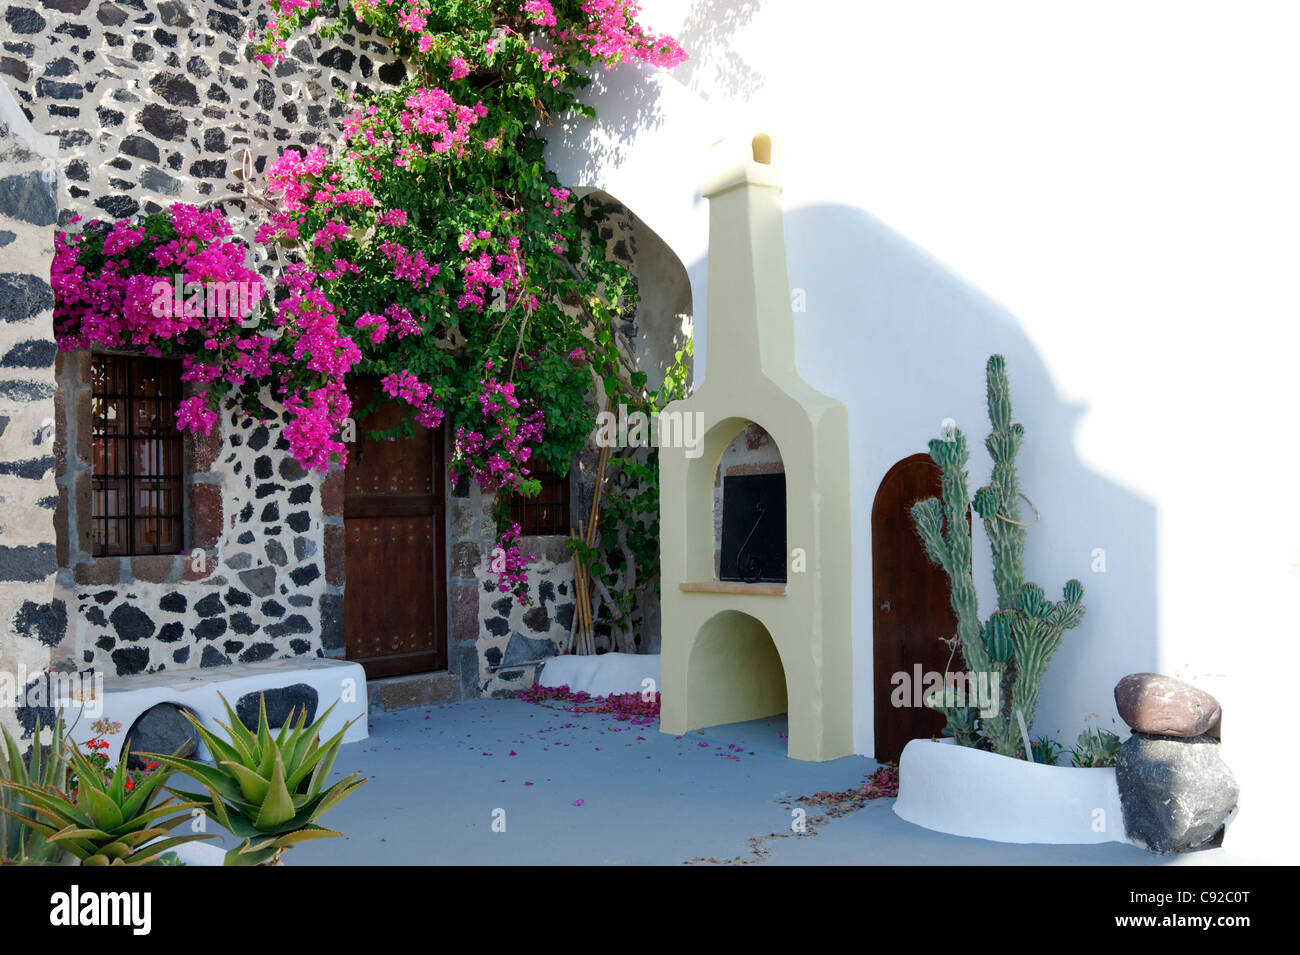 Charming view of a whitewashed courtyard wall with cacti and a Santorini rustic stone house draped in vivid pink bougainvillea. Stock Photo